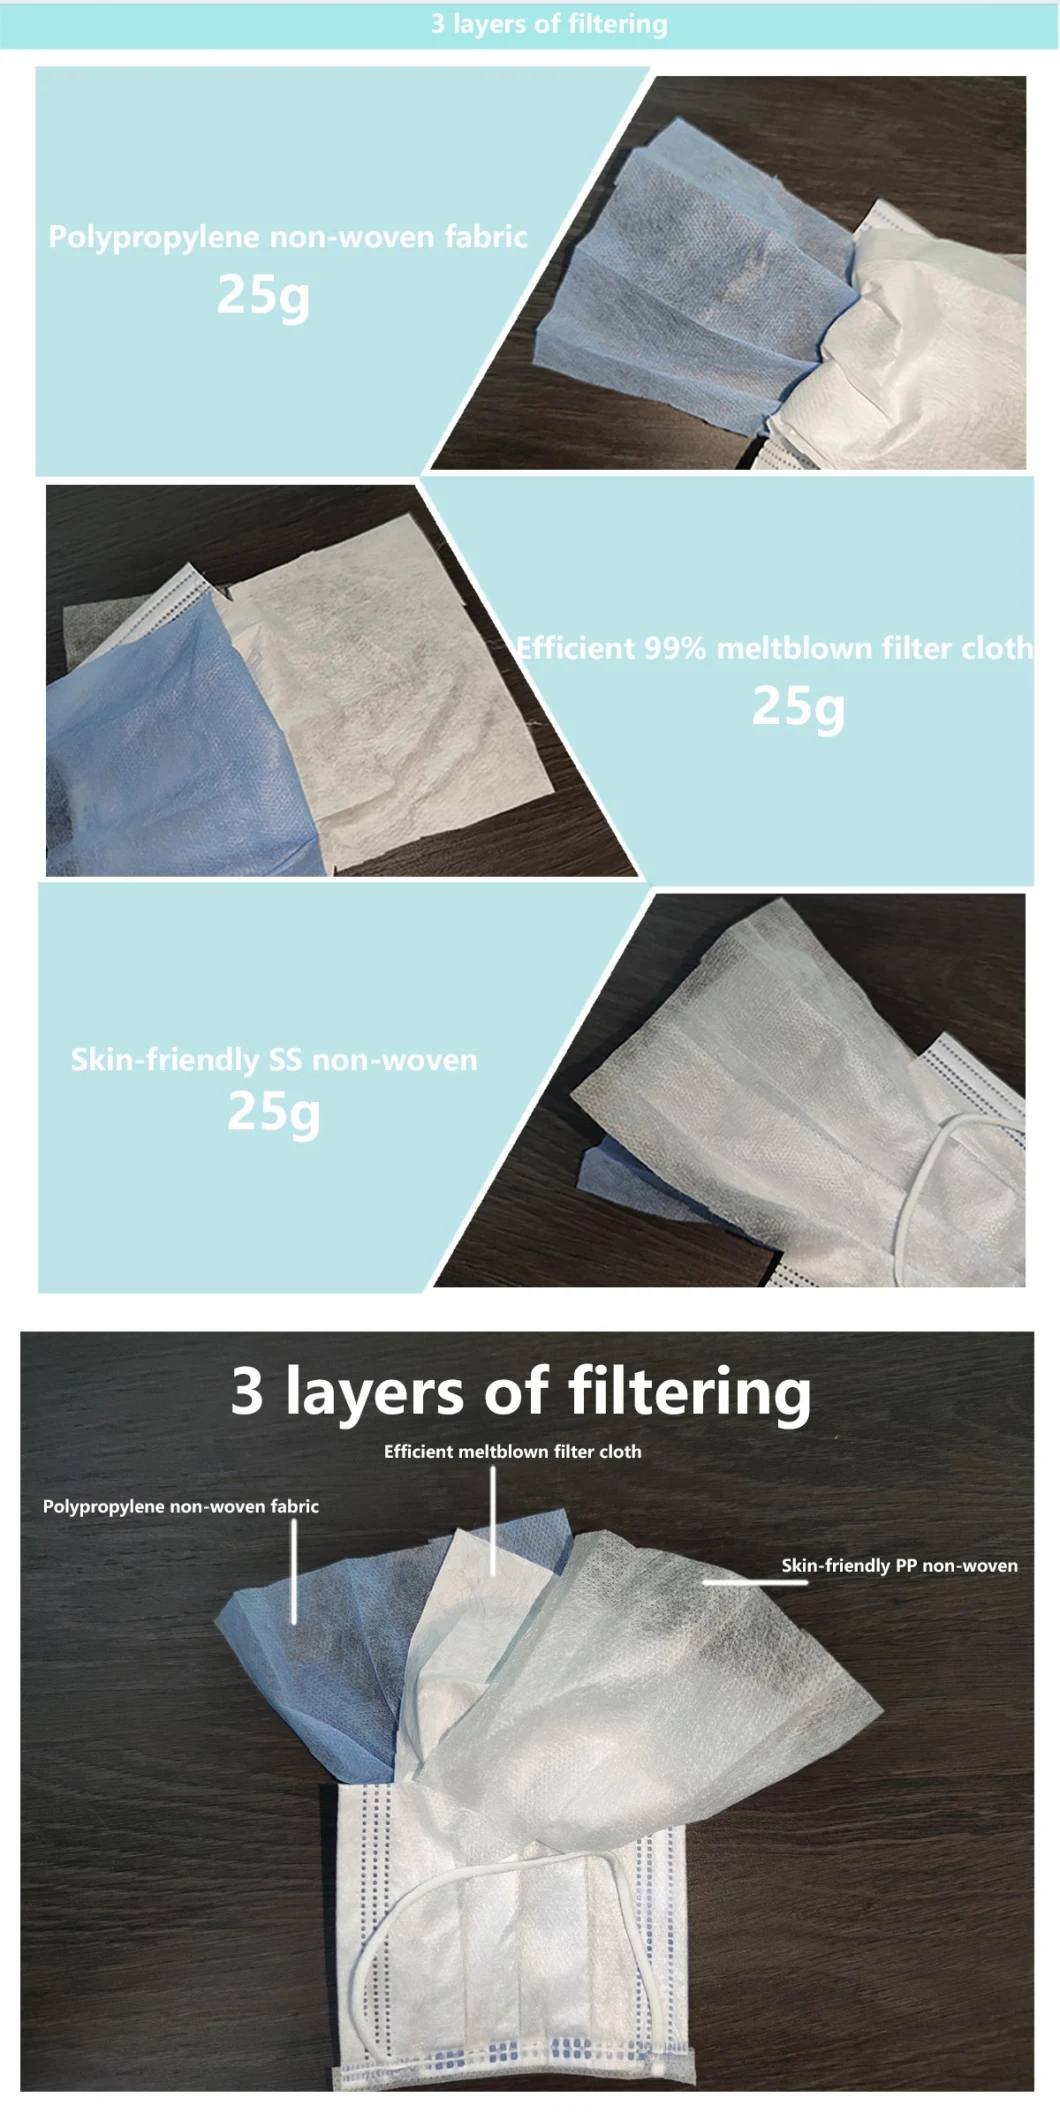 3ply Ault & Children Blue or White Disposable Medical Face Mask Disposable CE Surgical Face Mask